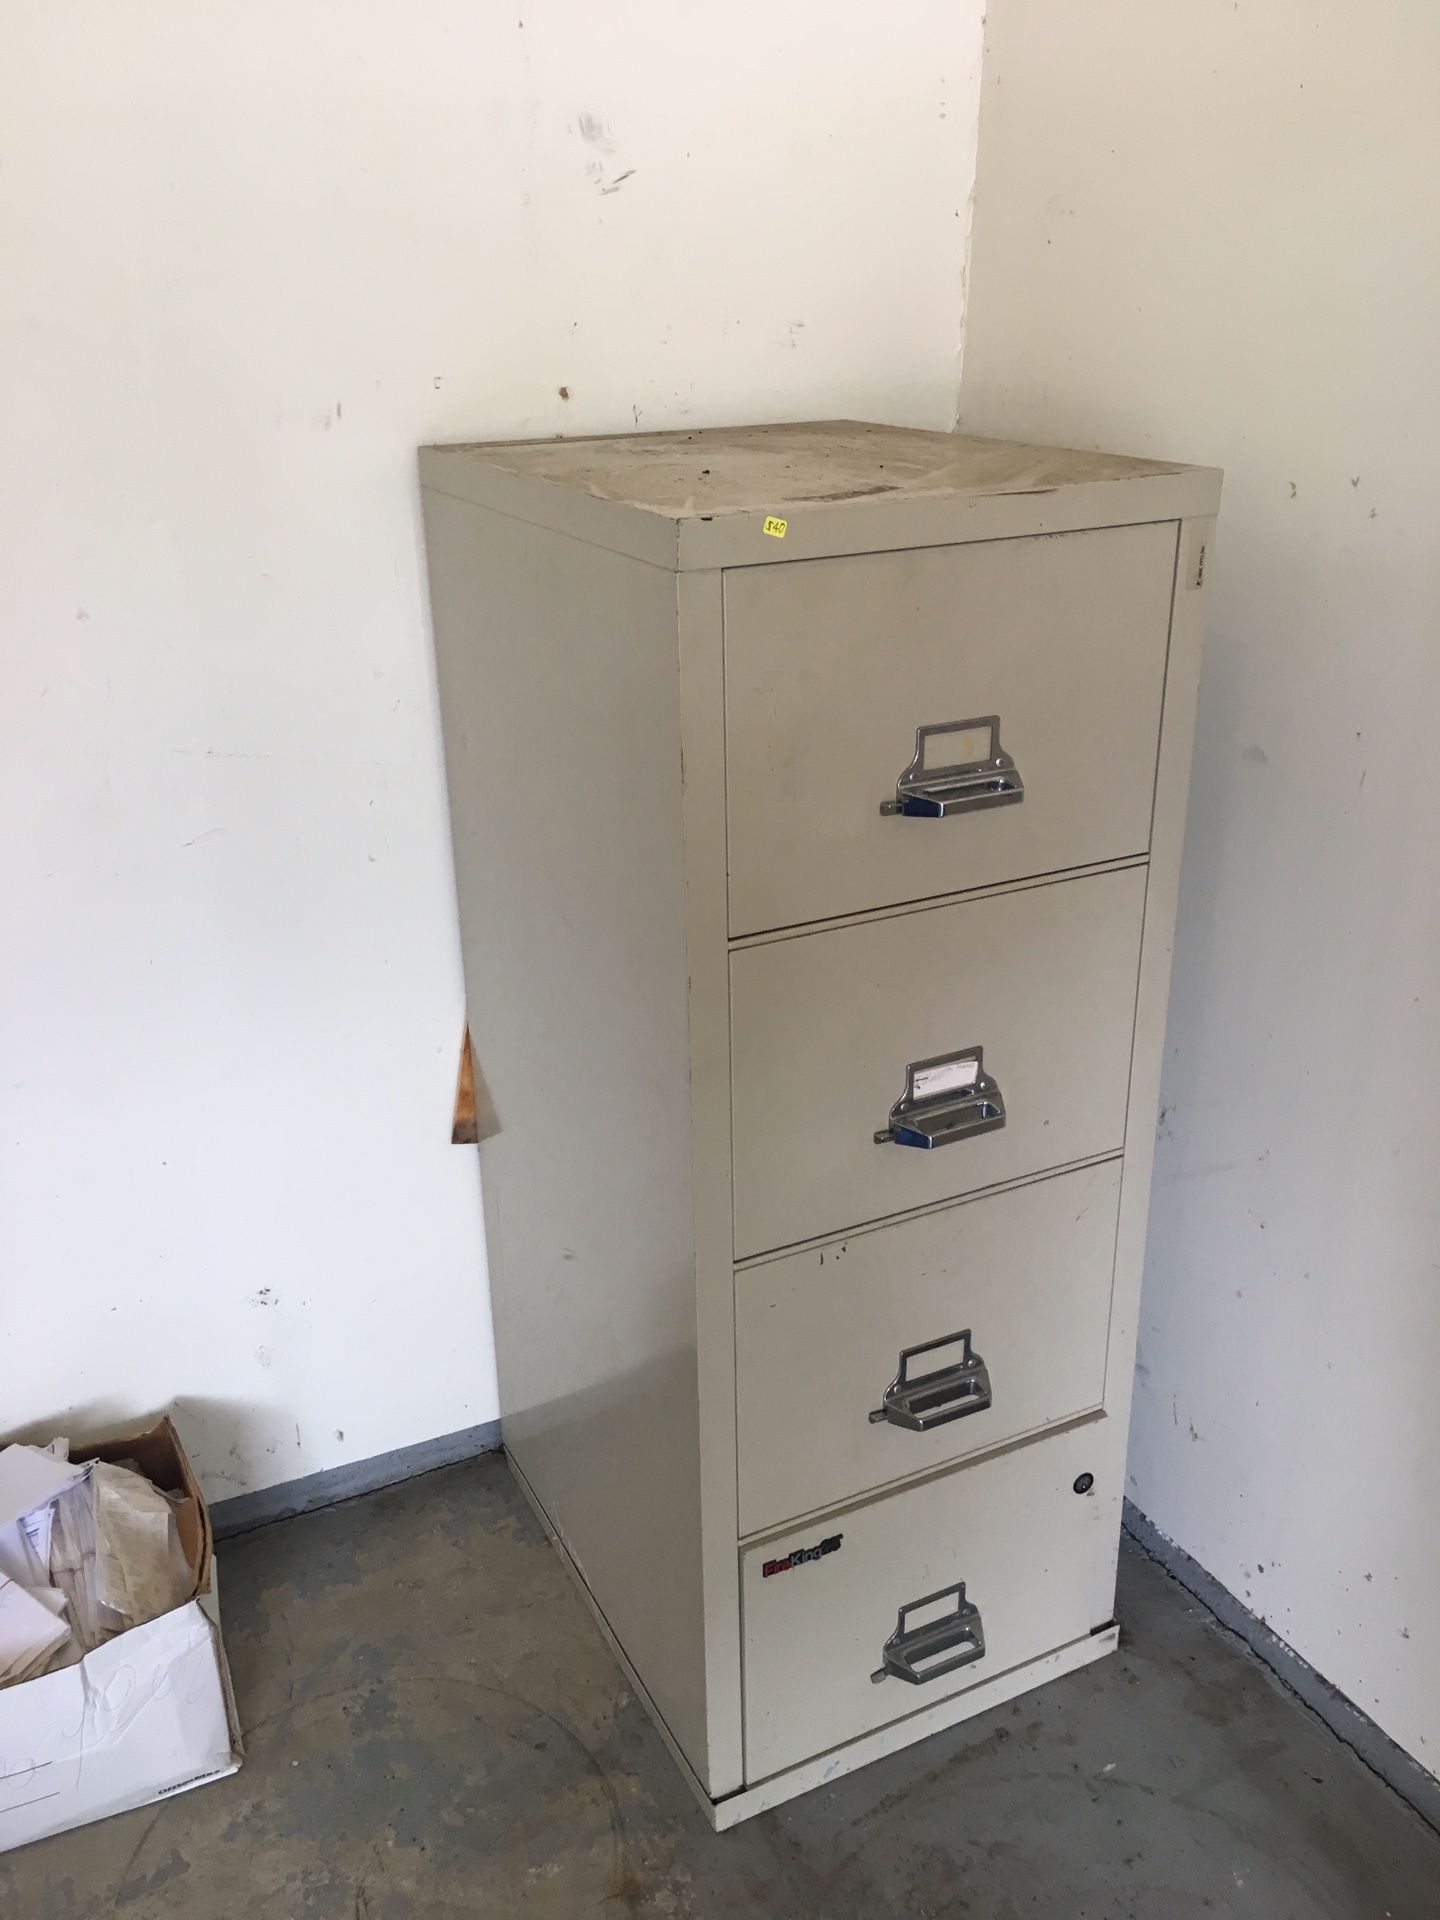 KING 25 FIRE PROOF FILING CABINET